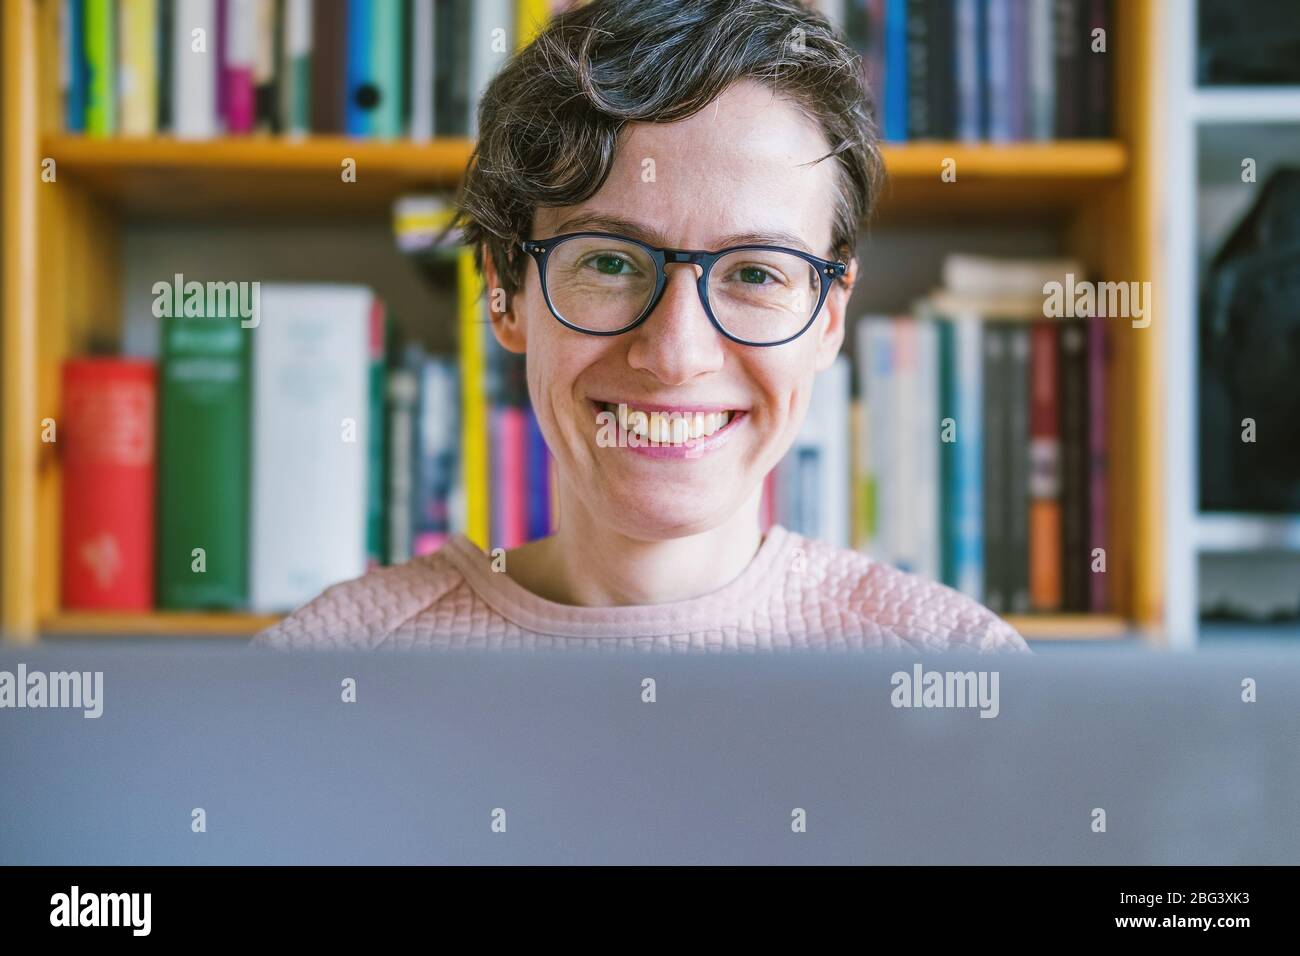 Woman working from home office. Young Caucasian short hair entrepreneur woman in sweater and glasses sitting and working online from home on computer Stock Photo